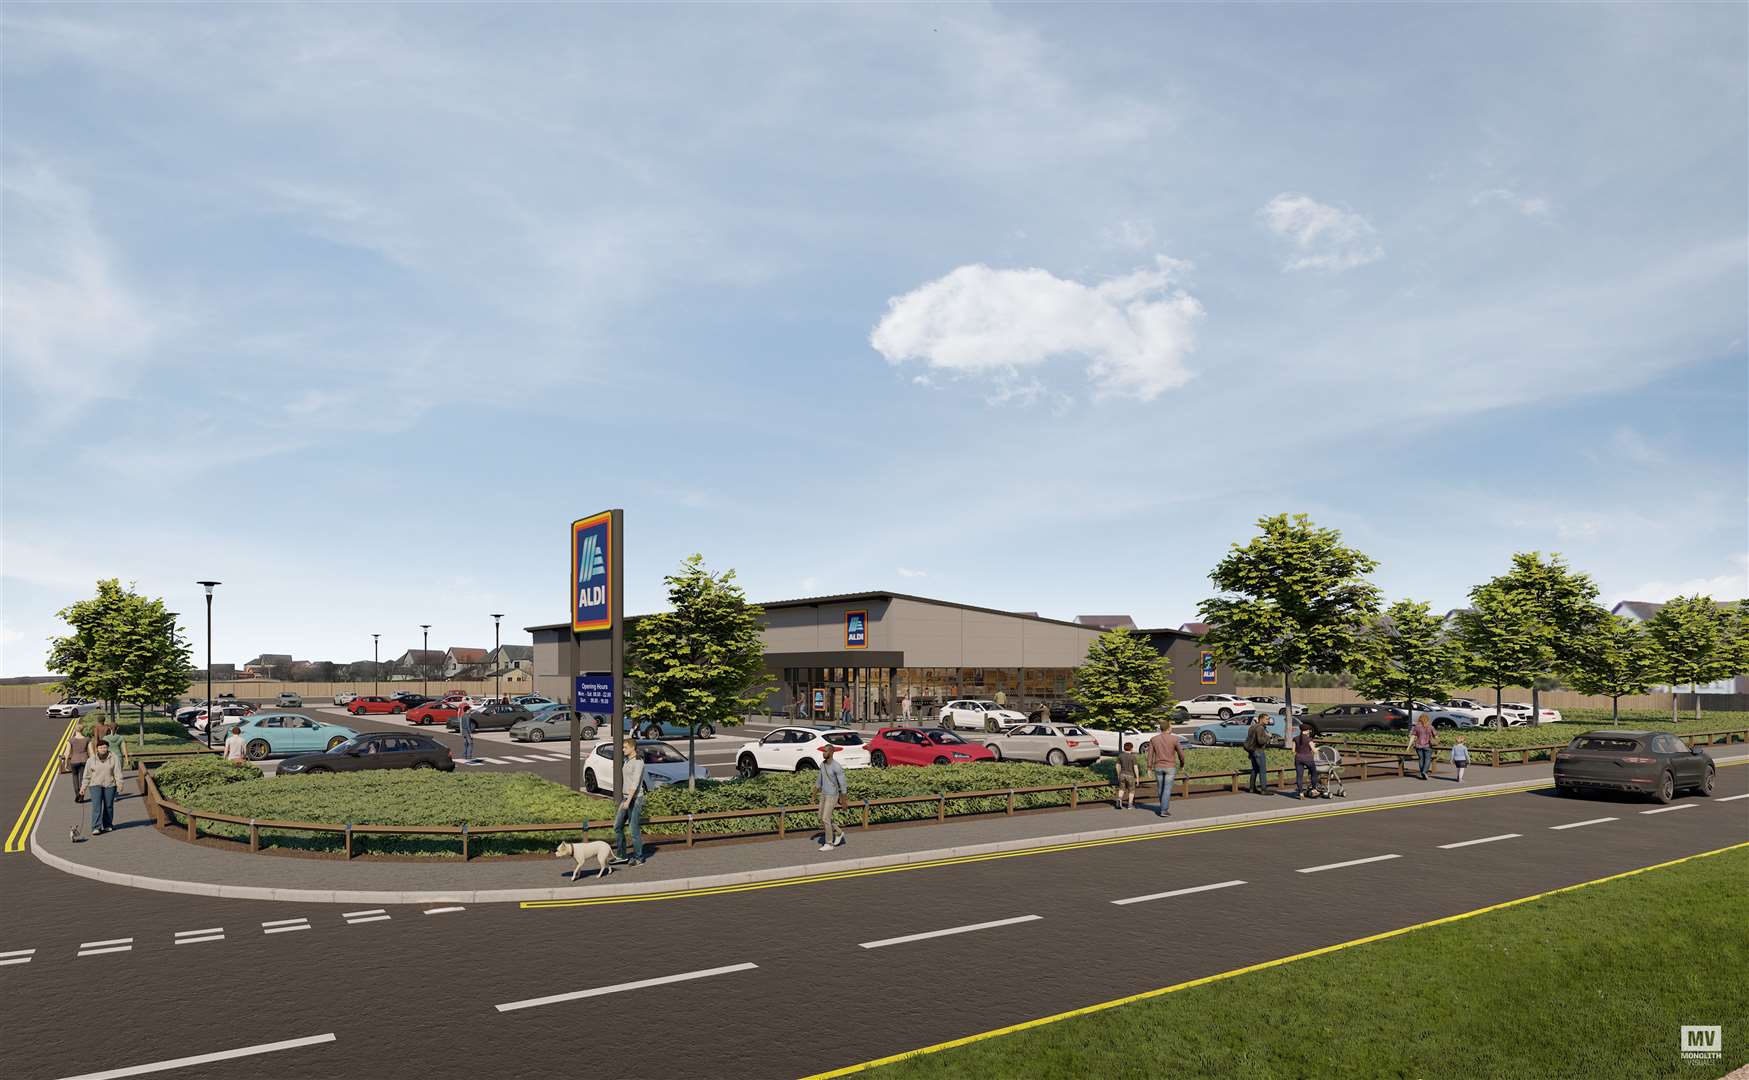 Aldi's application would see a new supermarket created at Macduff.